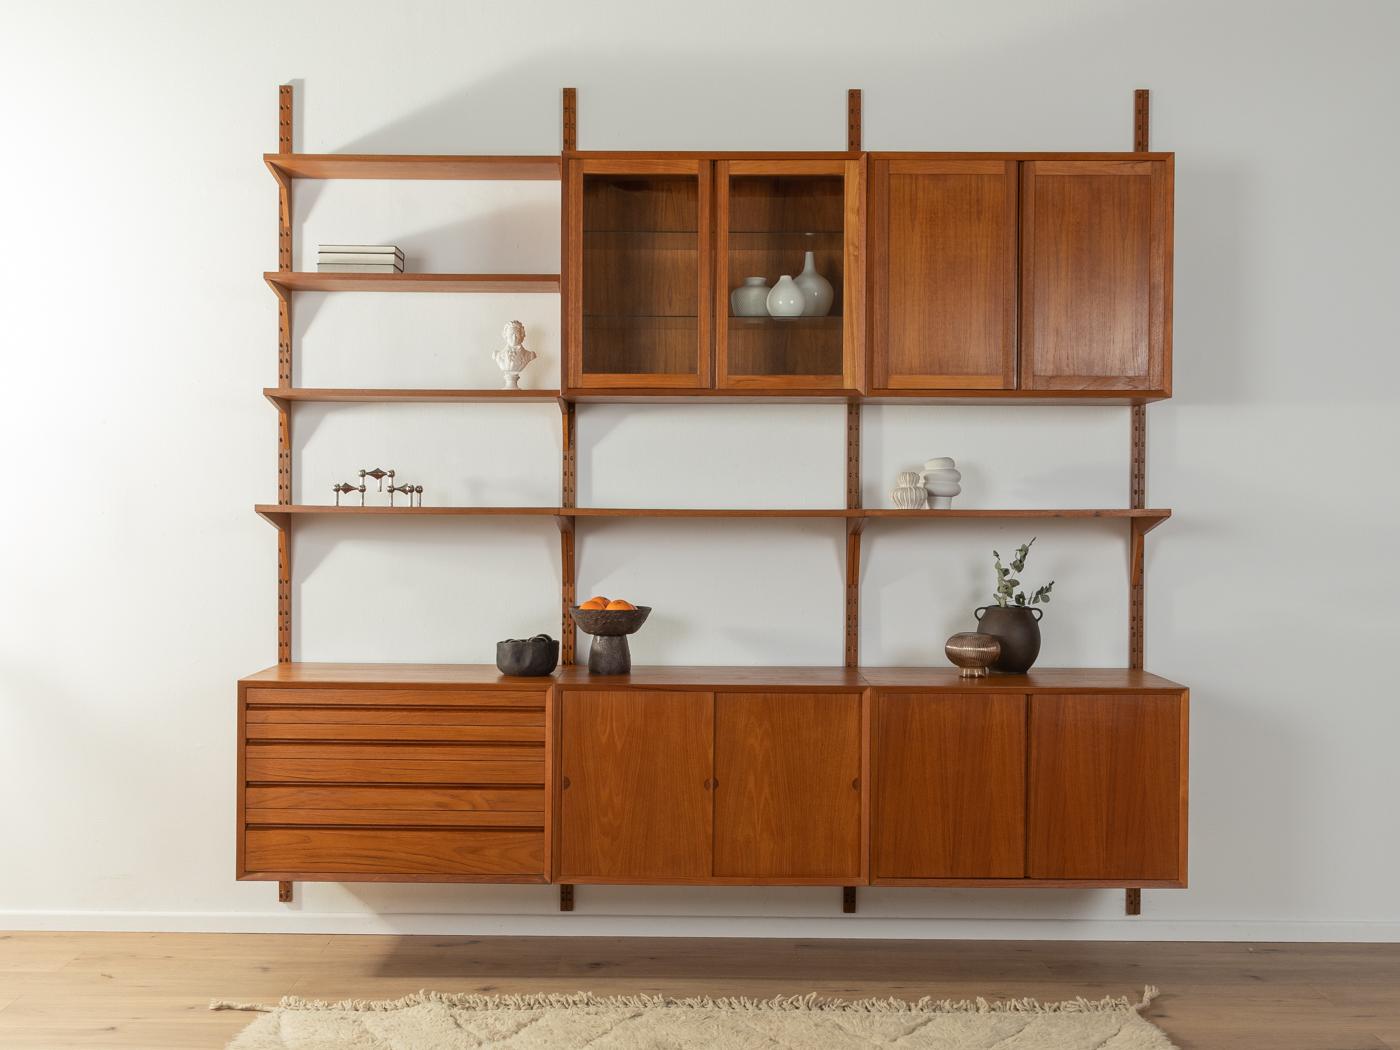 Classic shelving system from the 1960s. The high-quality containers and shelves are veneered in teak. The system consists of six shelves, two containers with doors, one container with glass doors, one container with sliding doors, one container with